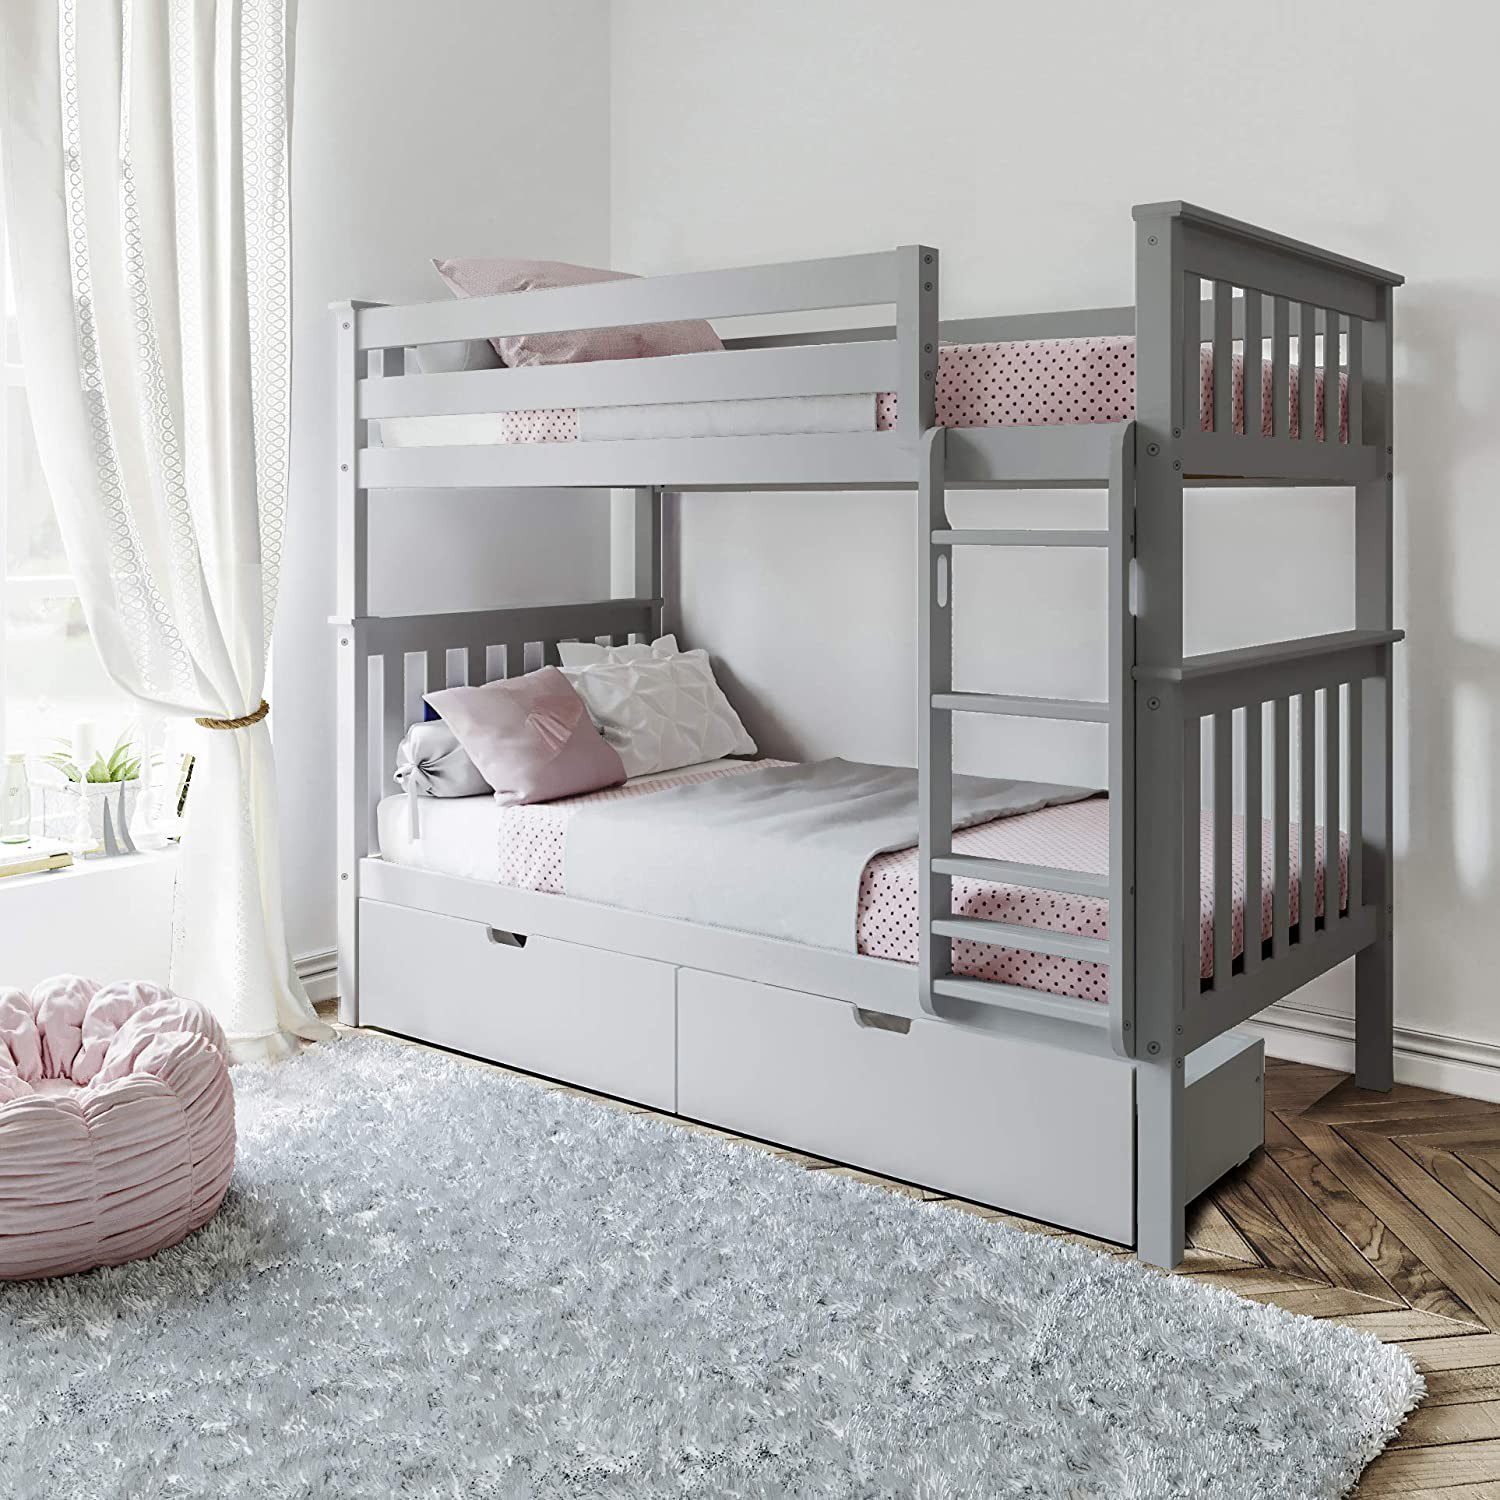 SOLID WOOD TWIN OVER TWIN BUNK BED IN GREY WITH STORAGE